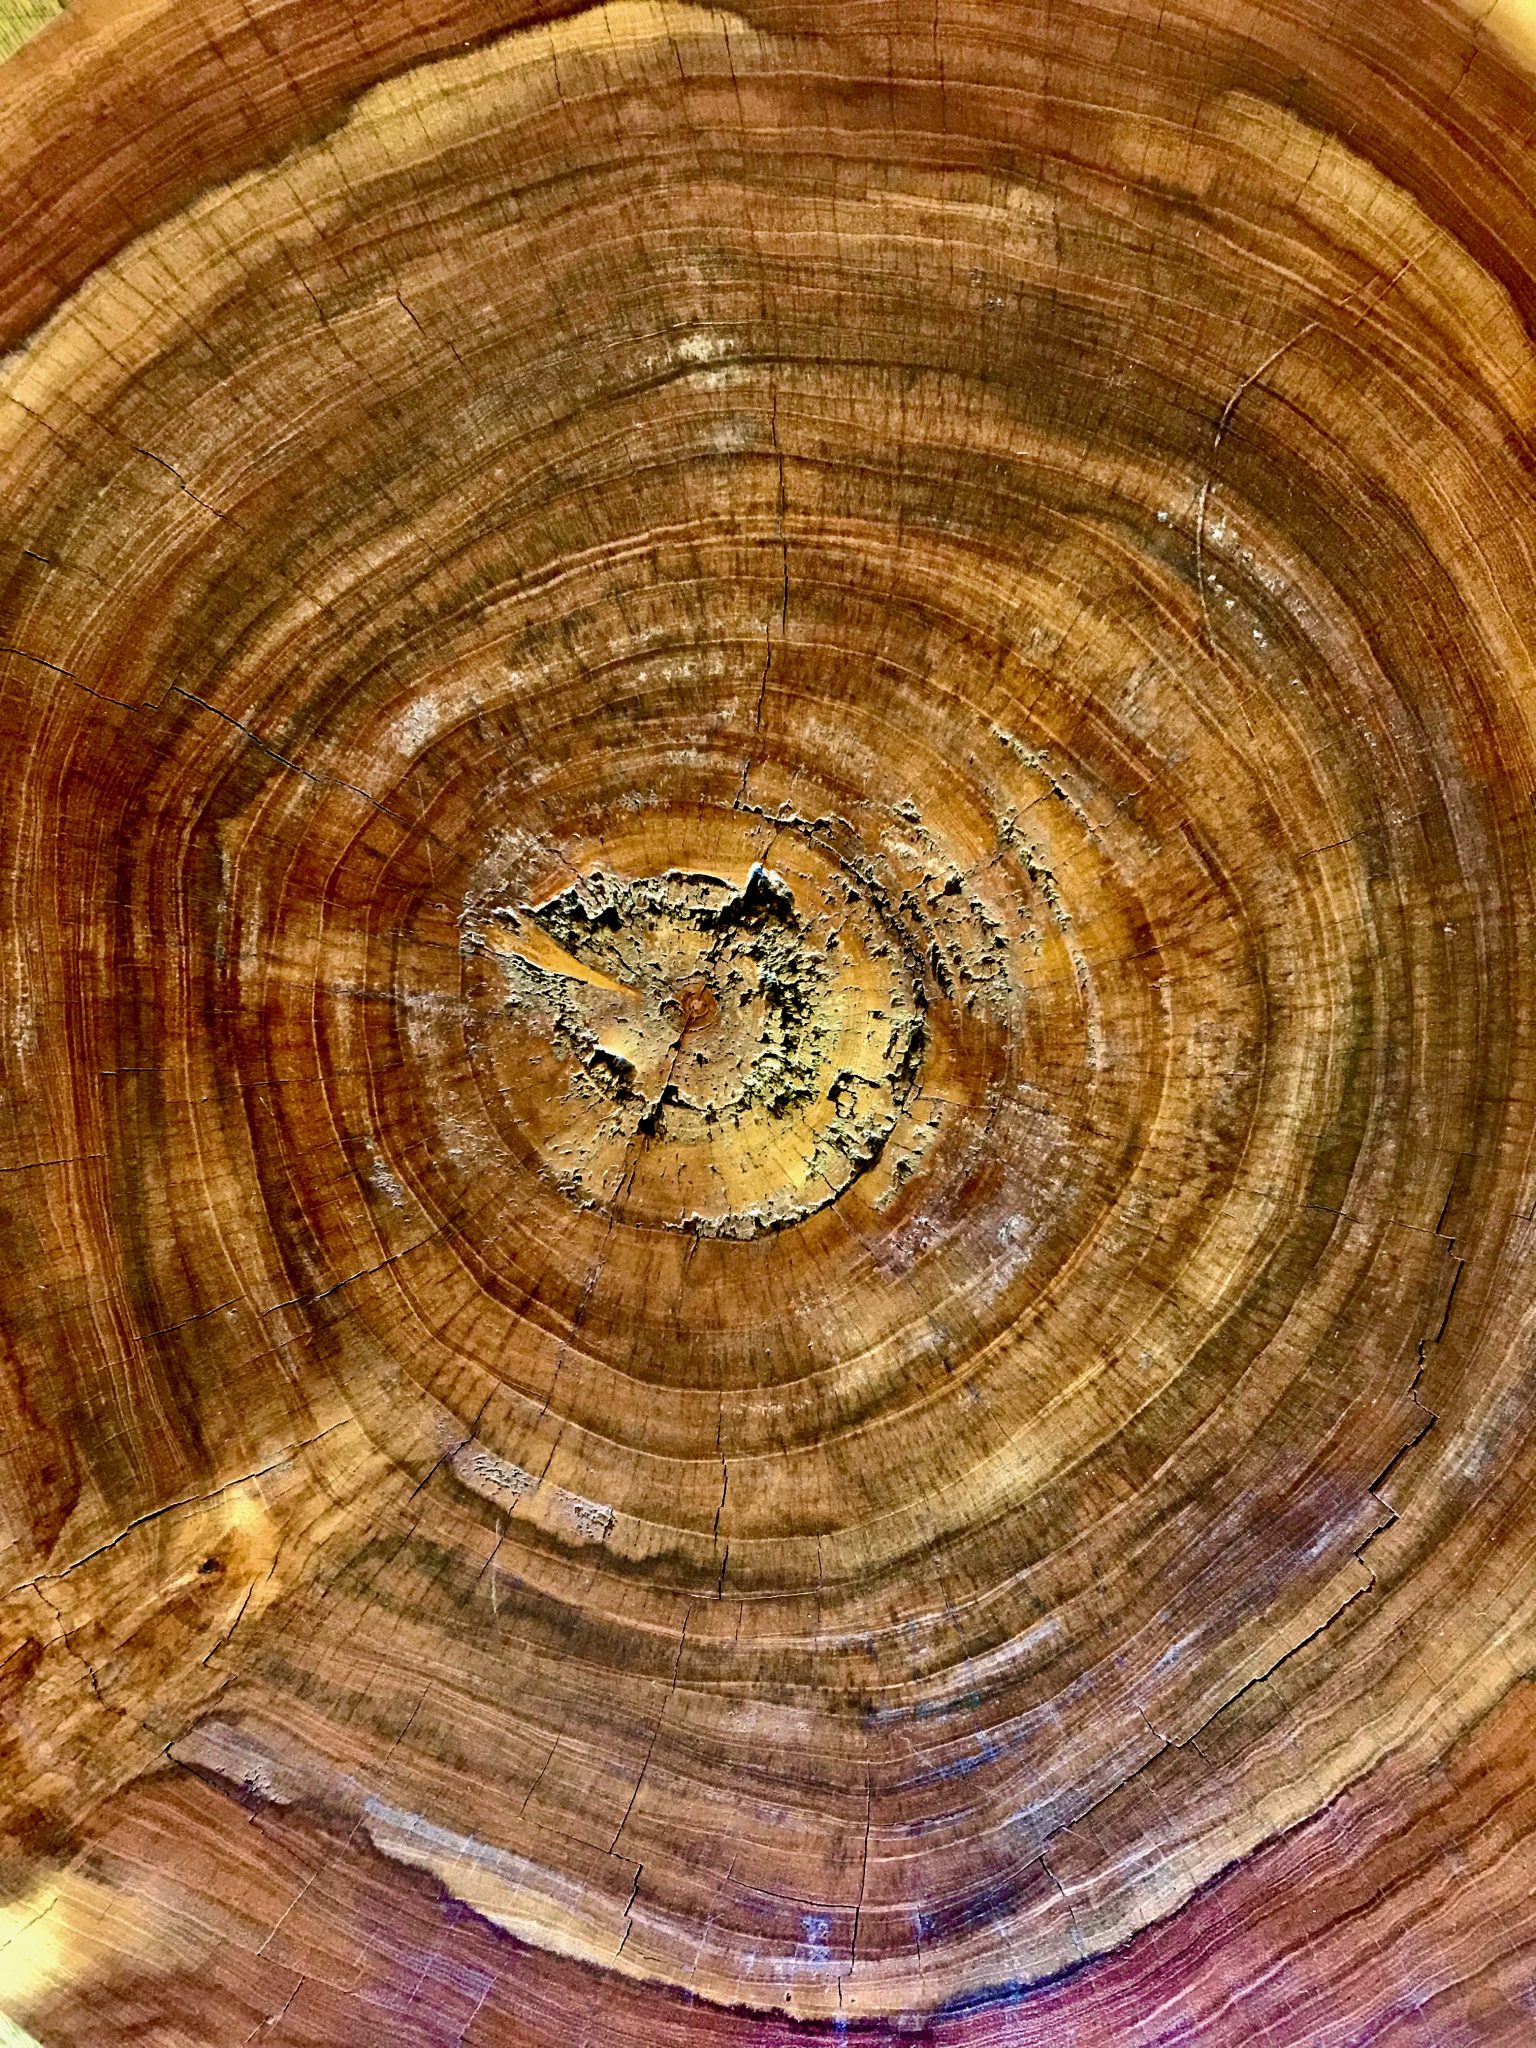 Patterns in wood